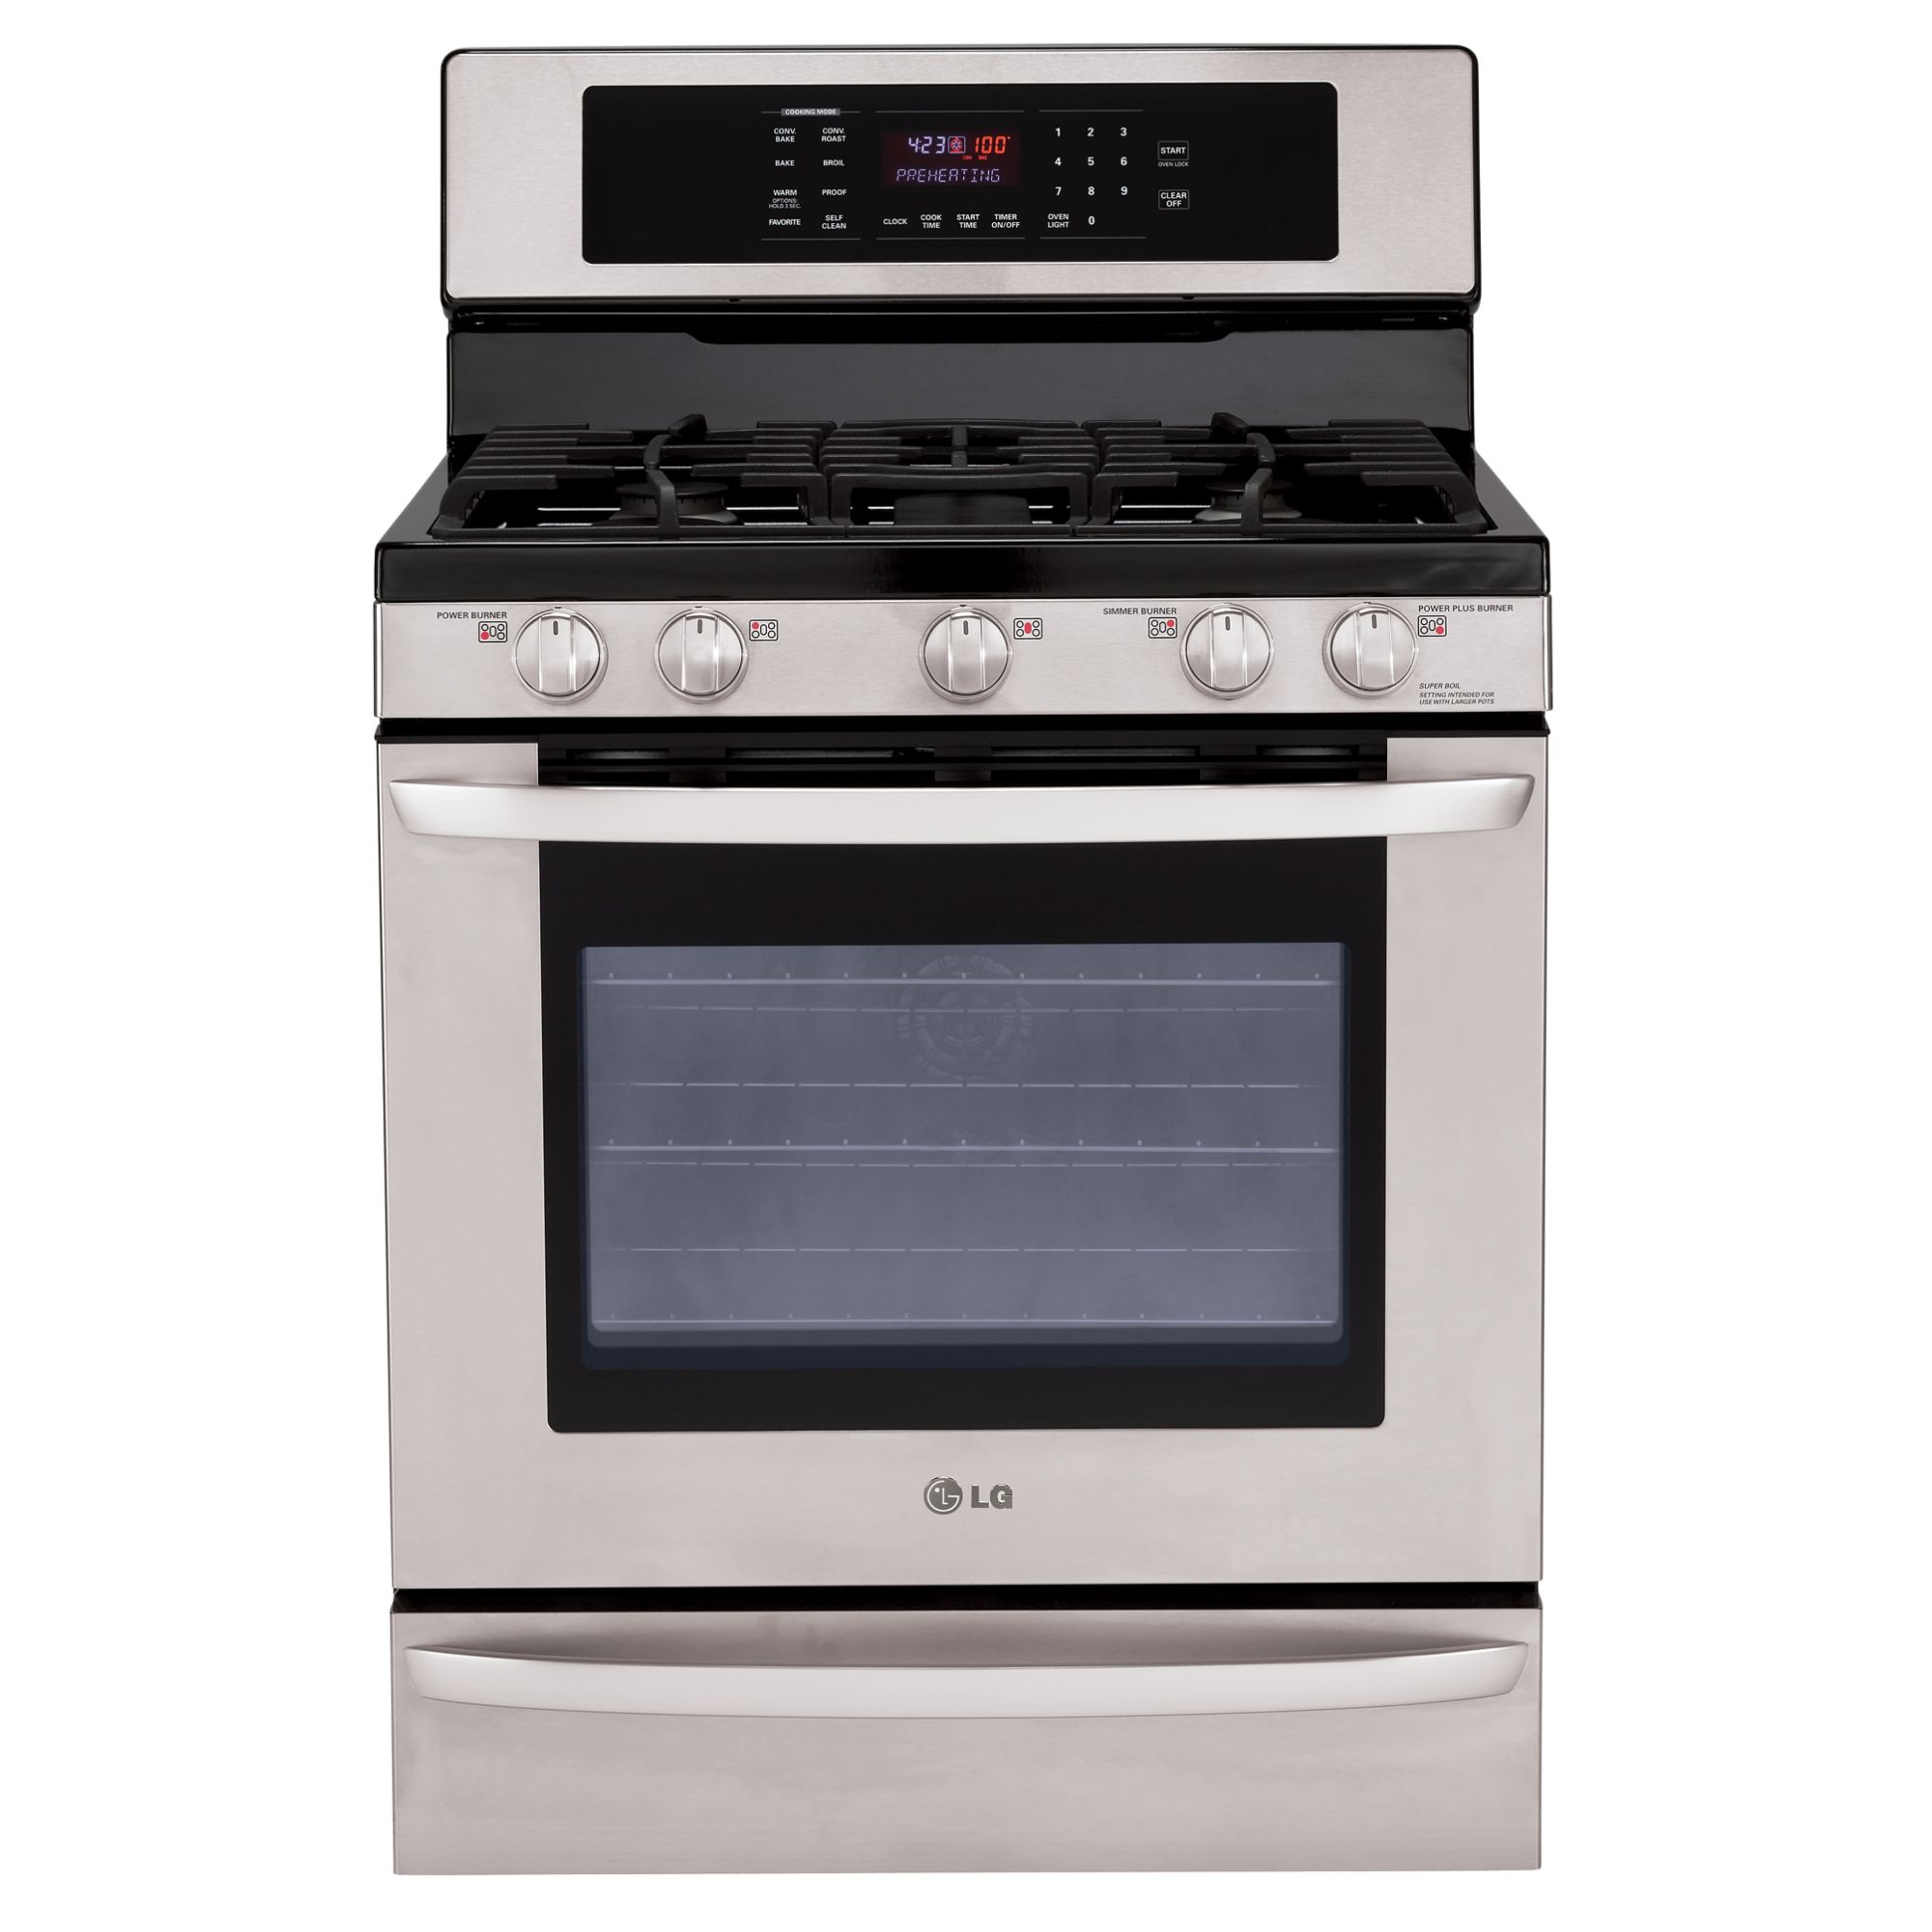 LG - LRG3095ST - 5.4 cu. ft. Freestanding Gas Range-Stainless Steel Lg Stainless Steel Gas Stove